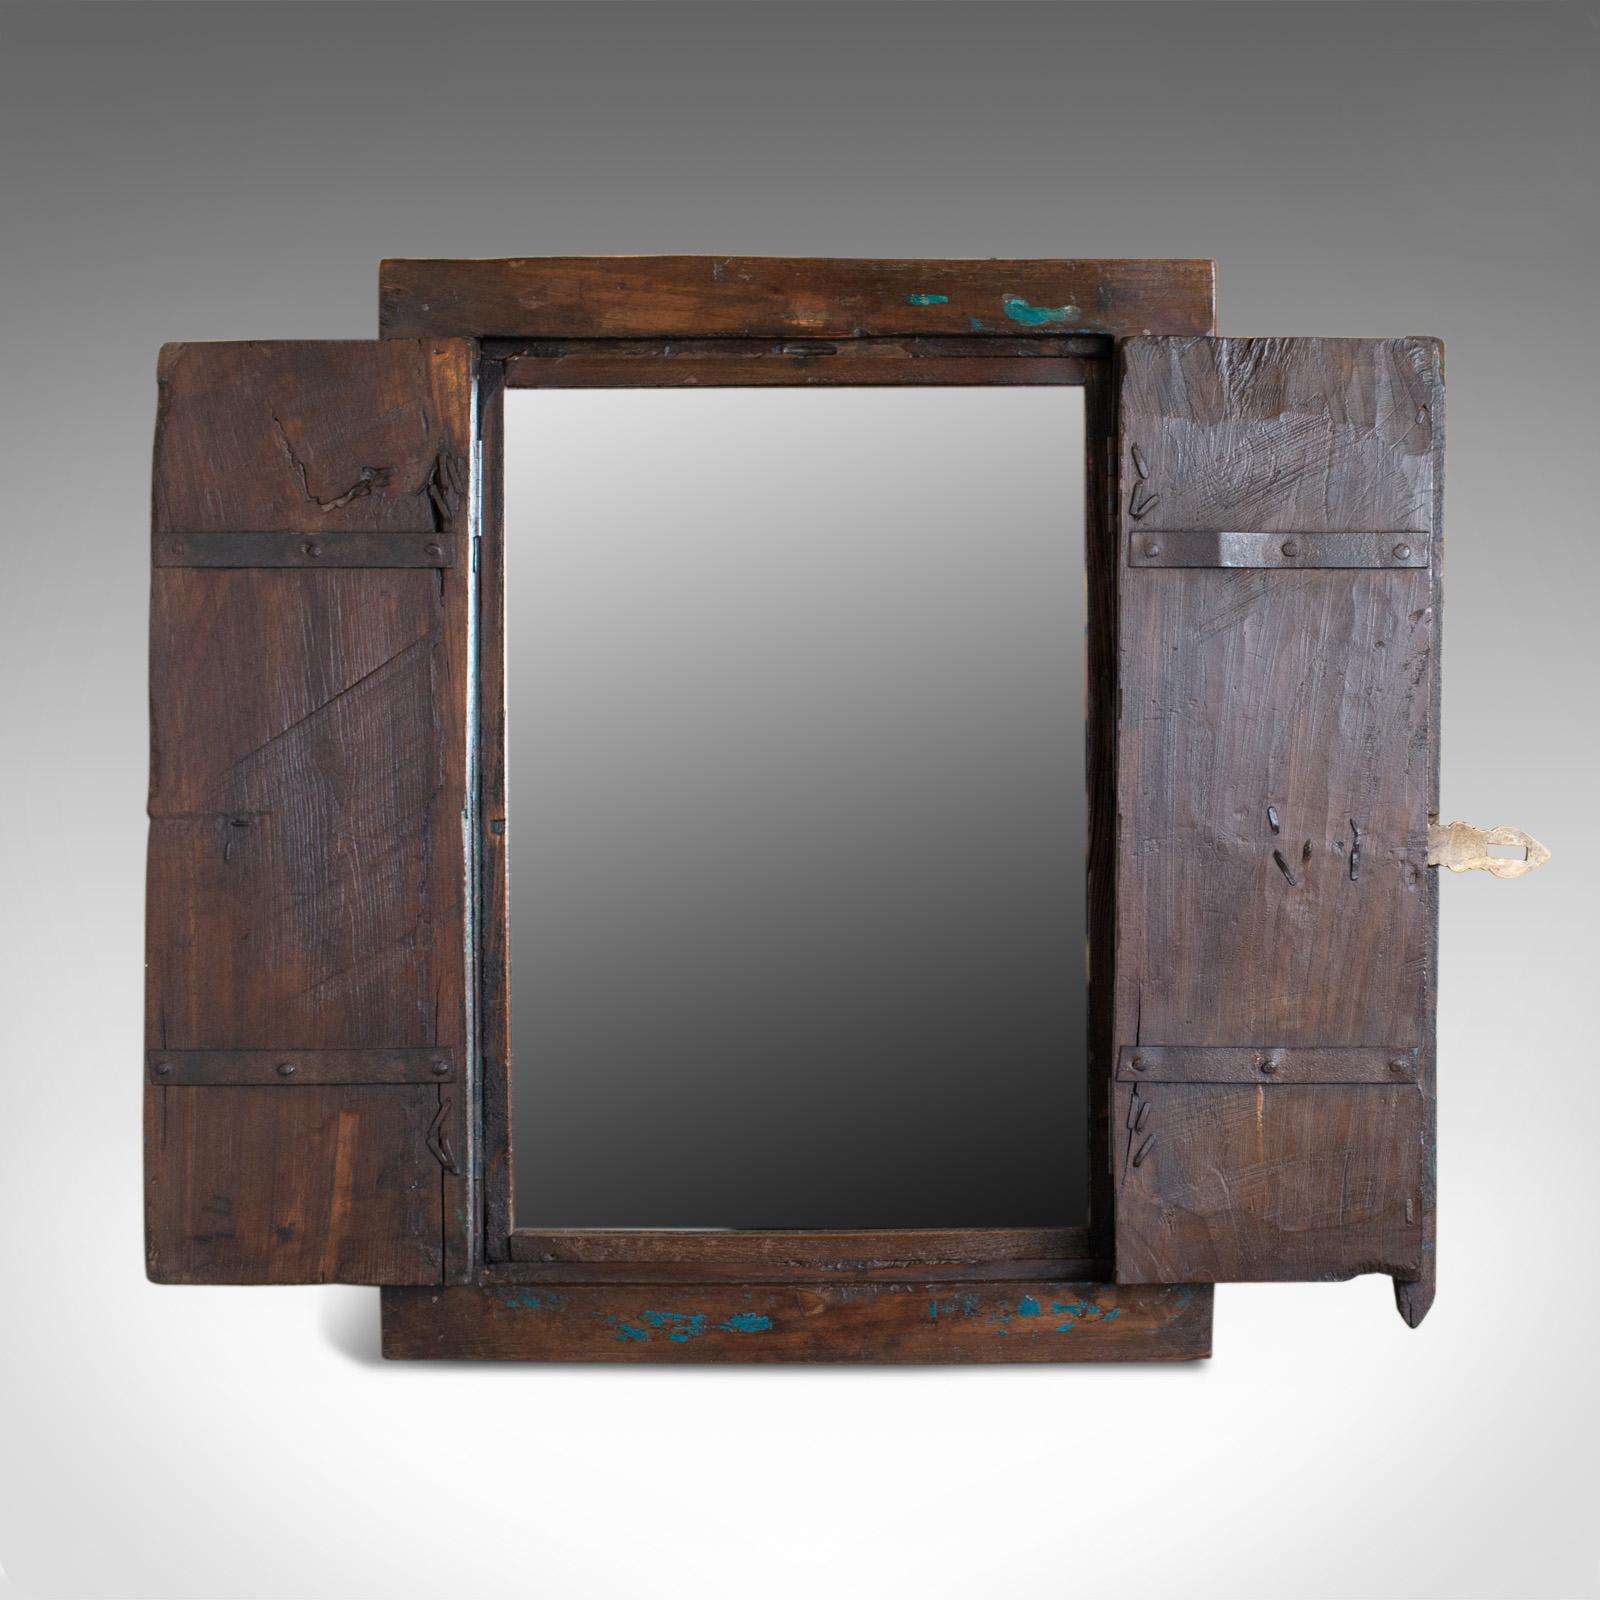 Wood Vintage Asian Cupboard Mirror, Rustic, Wall Cabinet, Mid-Late 20th Century